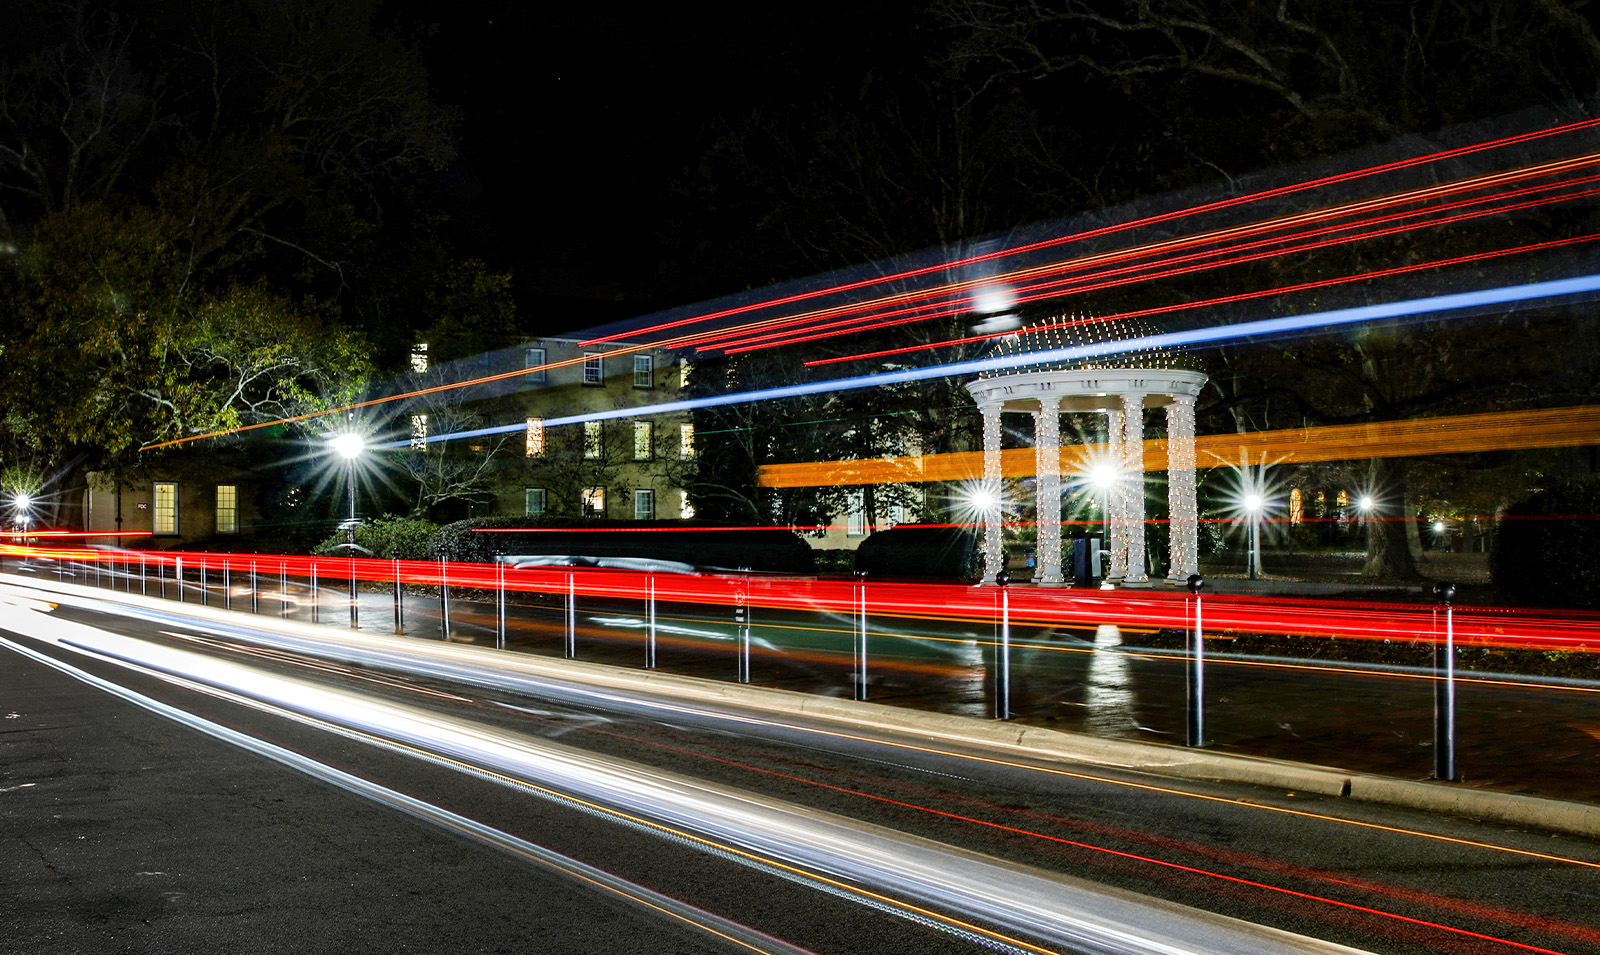 Nightime view of the Old Well decorated with holiday lights on the campus of UNC-Chapel Hill as red and white long-exposure car lights of passing-by vehicles on Cameron Avenue are seen in the foreground.